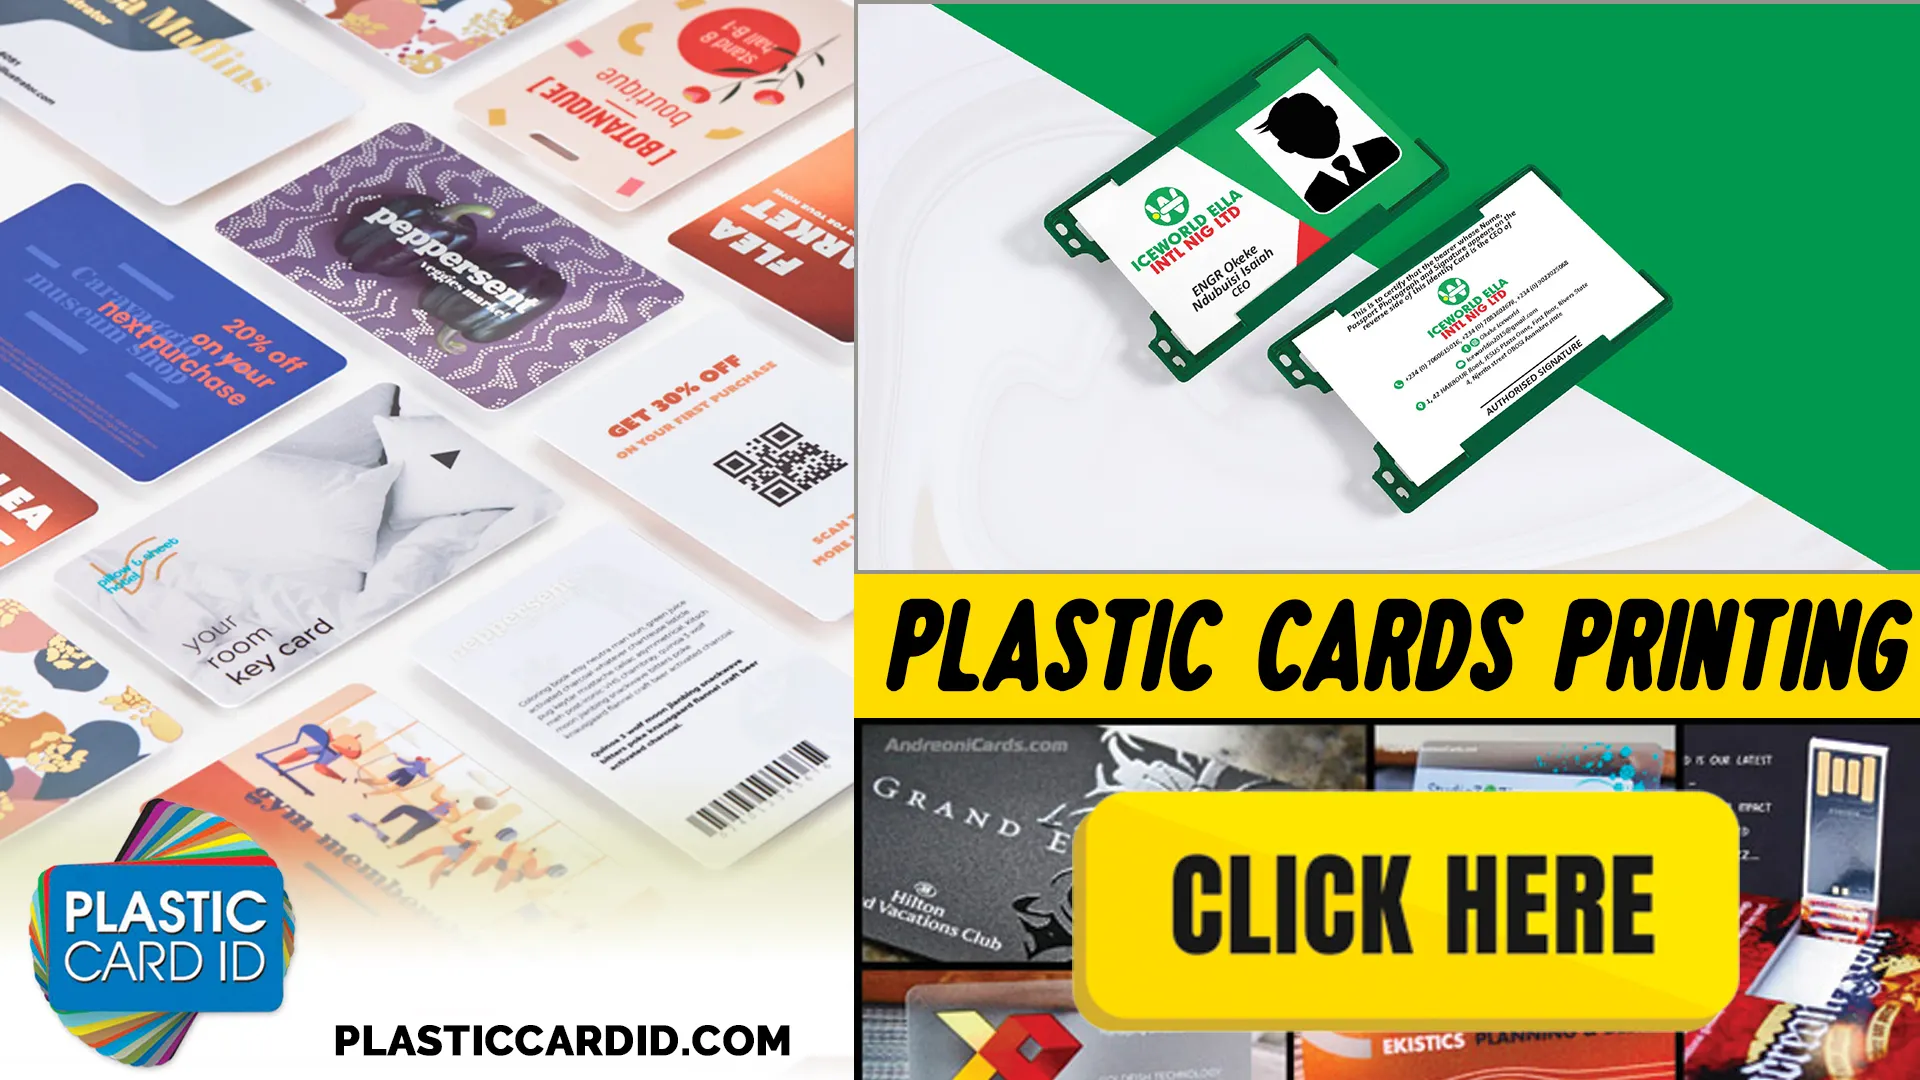 Welcome to Plastic Card ID




: Pioneering the Innovations of Tomorrow